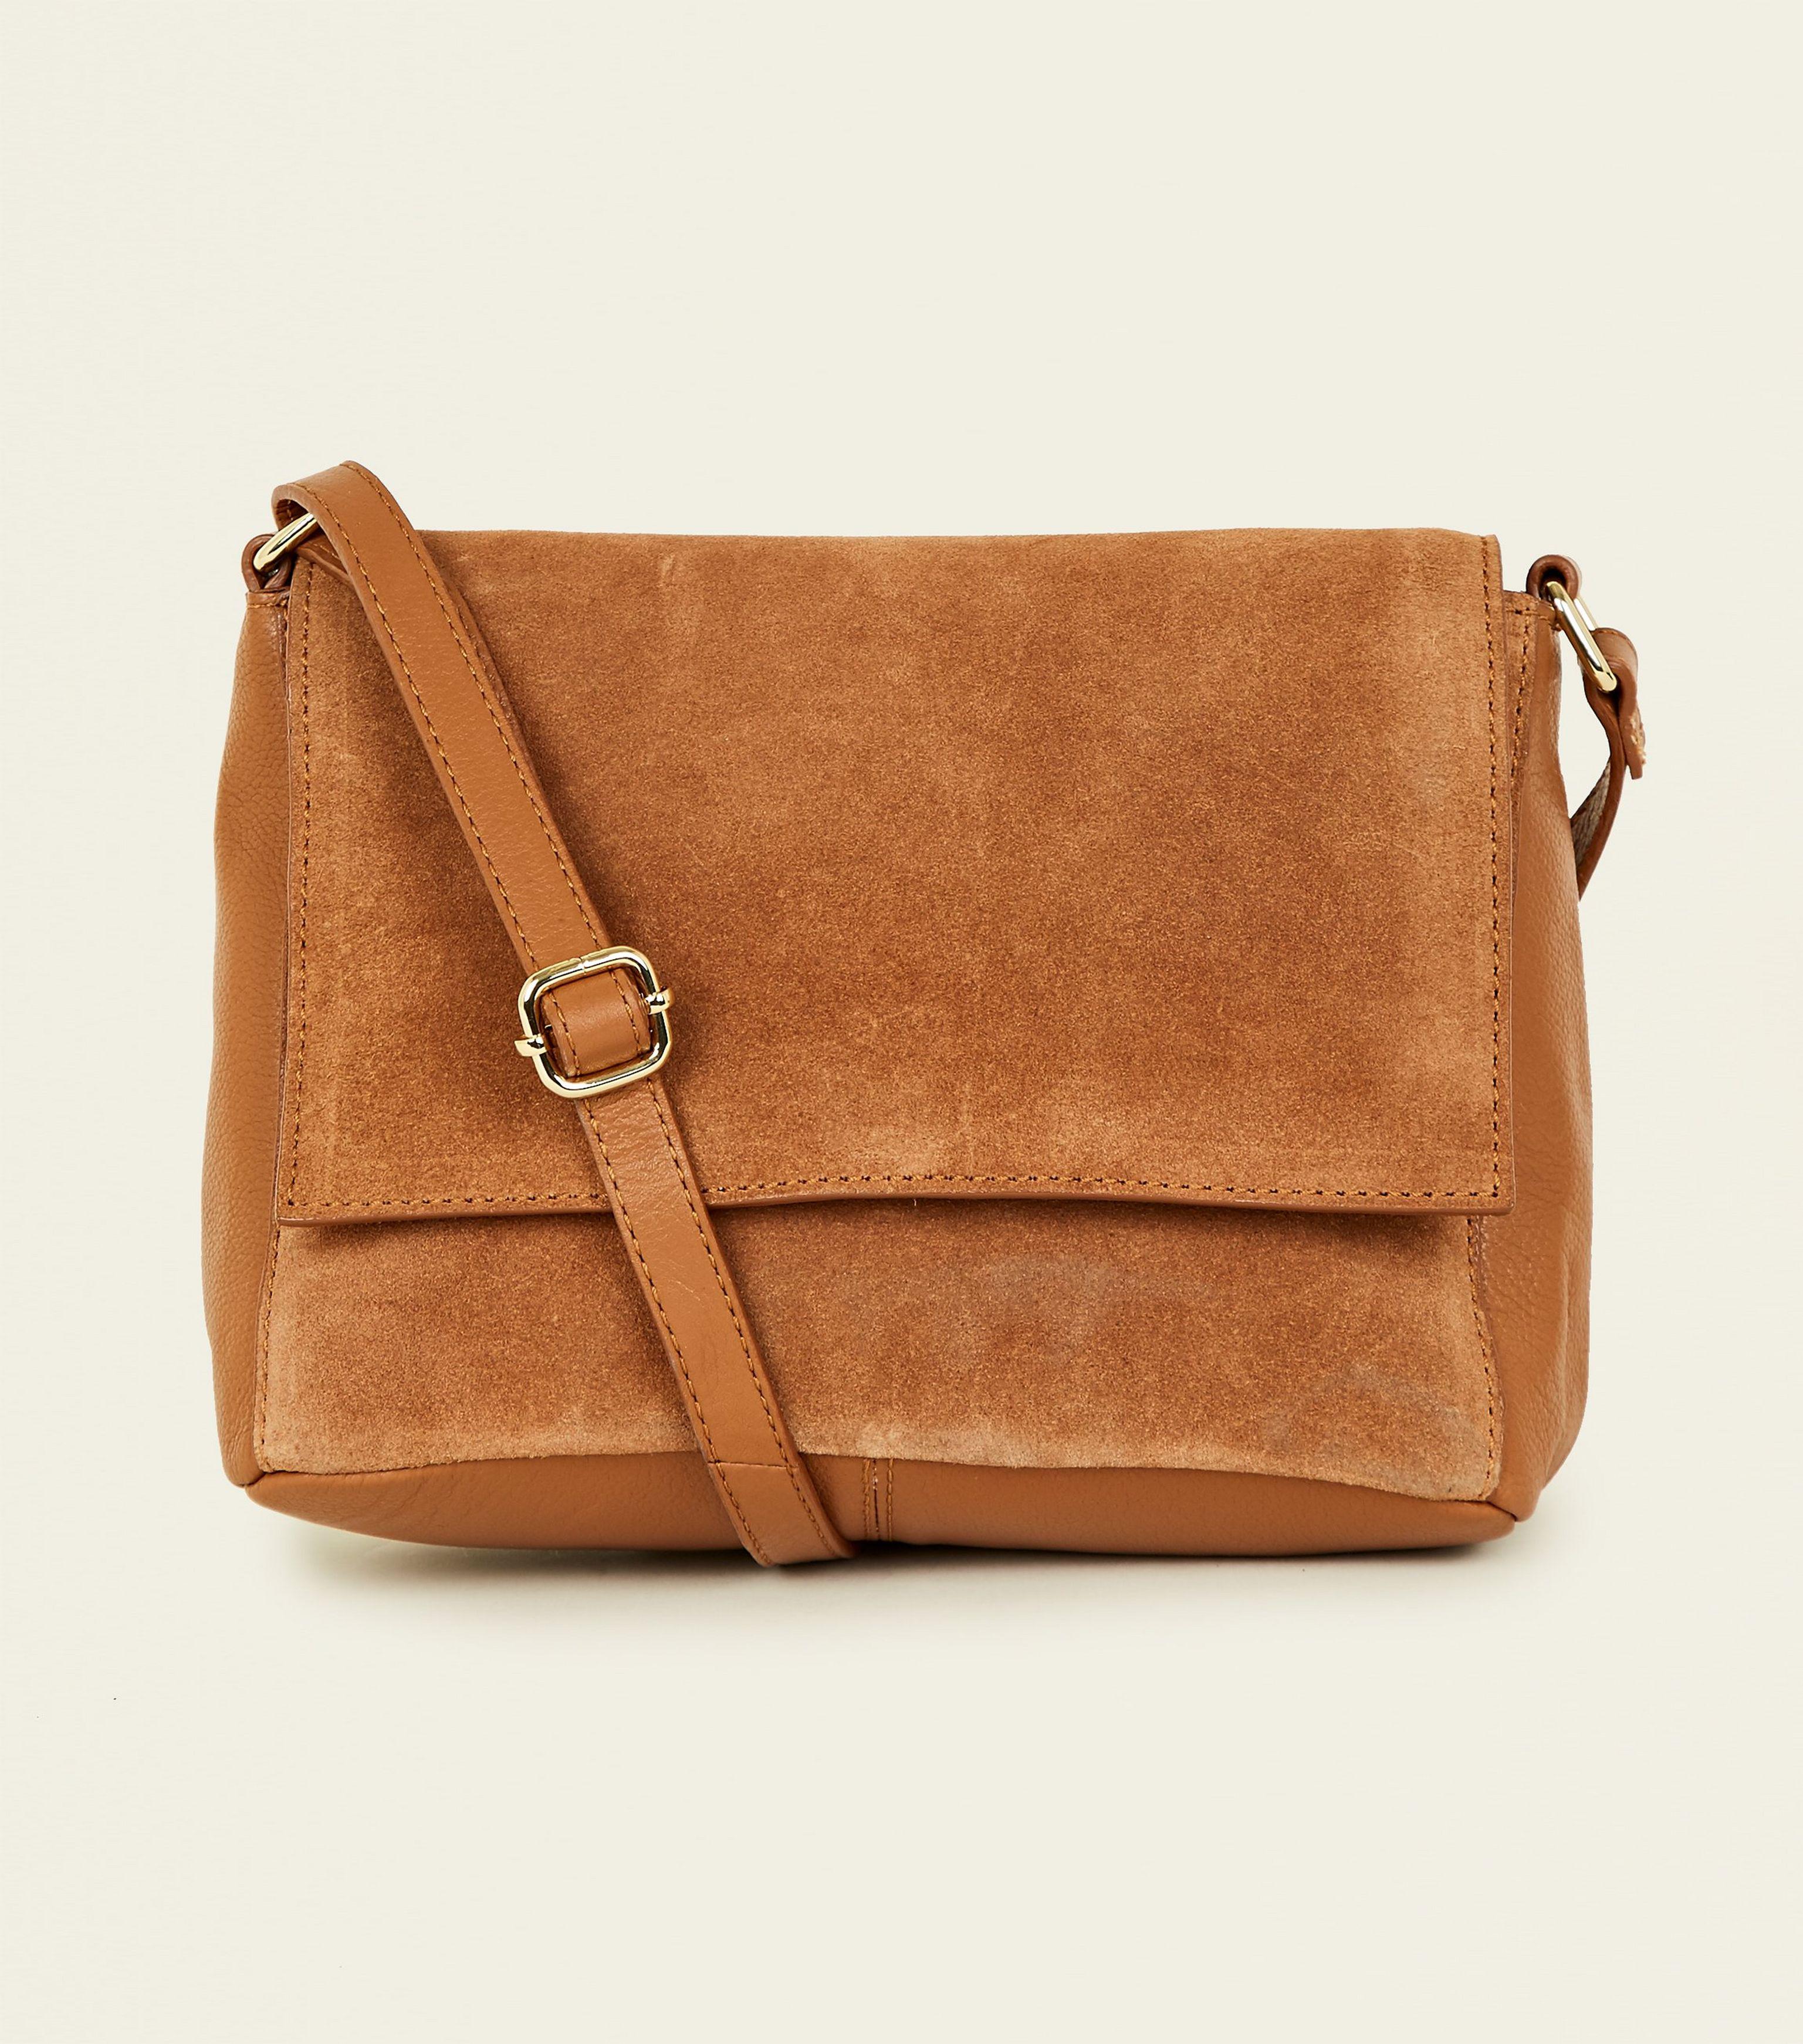 New Look Tan Leather And Suede Foldover Cross Body Bag in Brown - Lyst